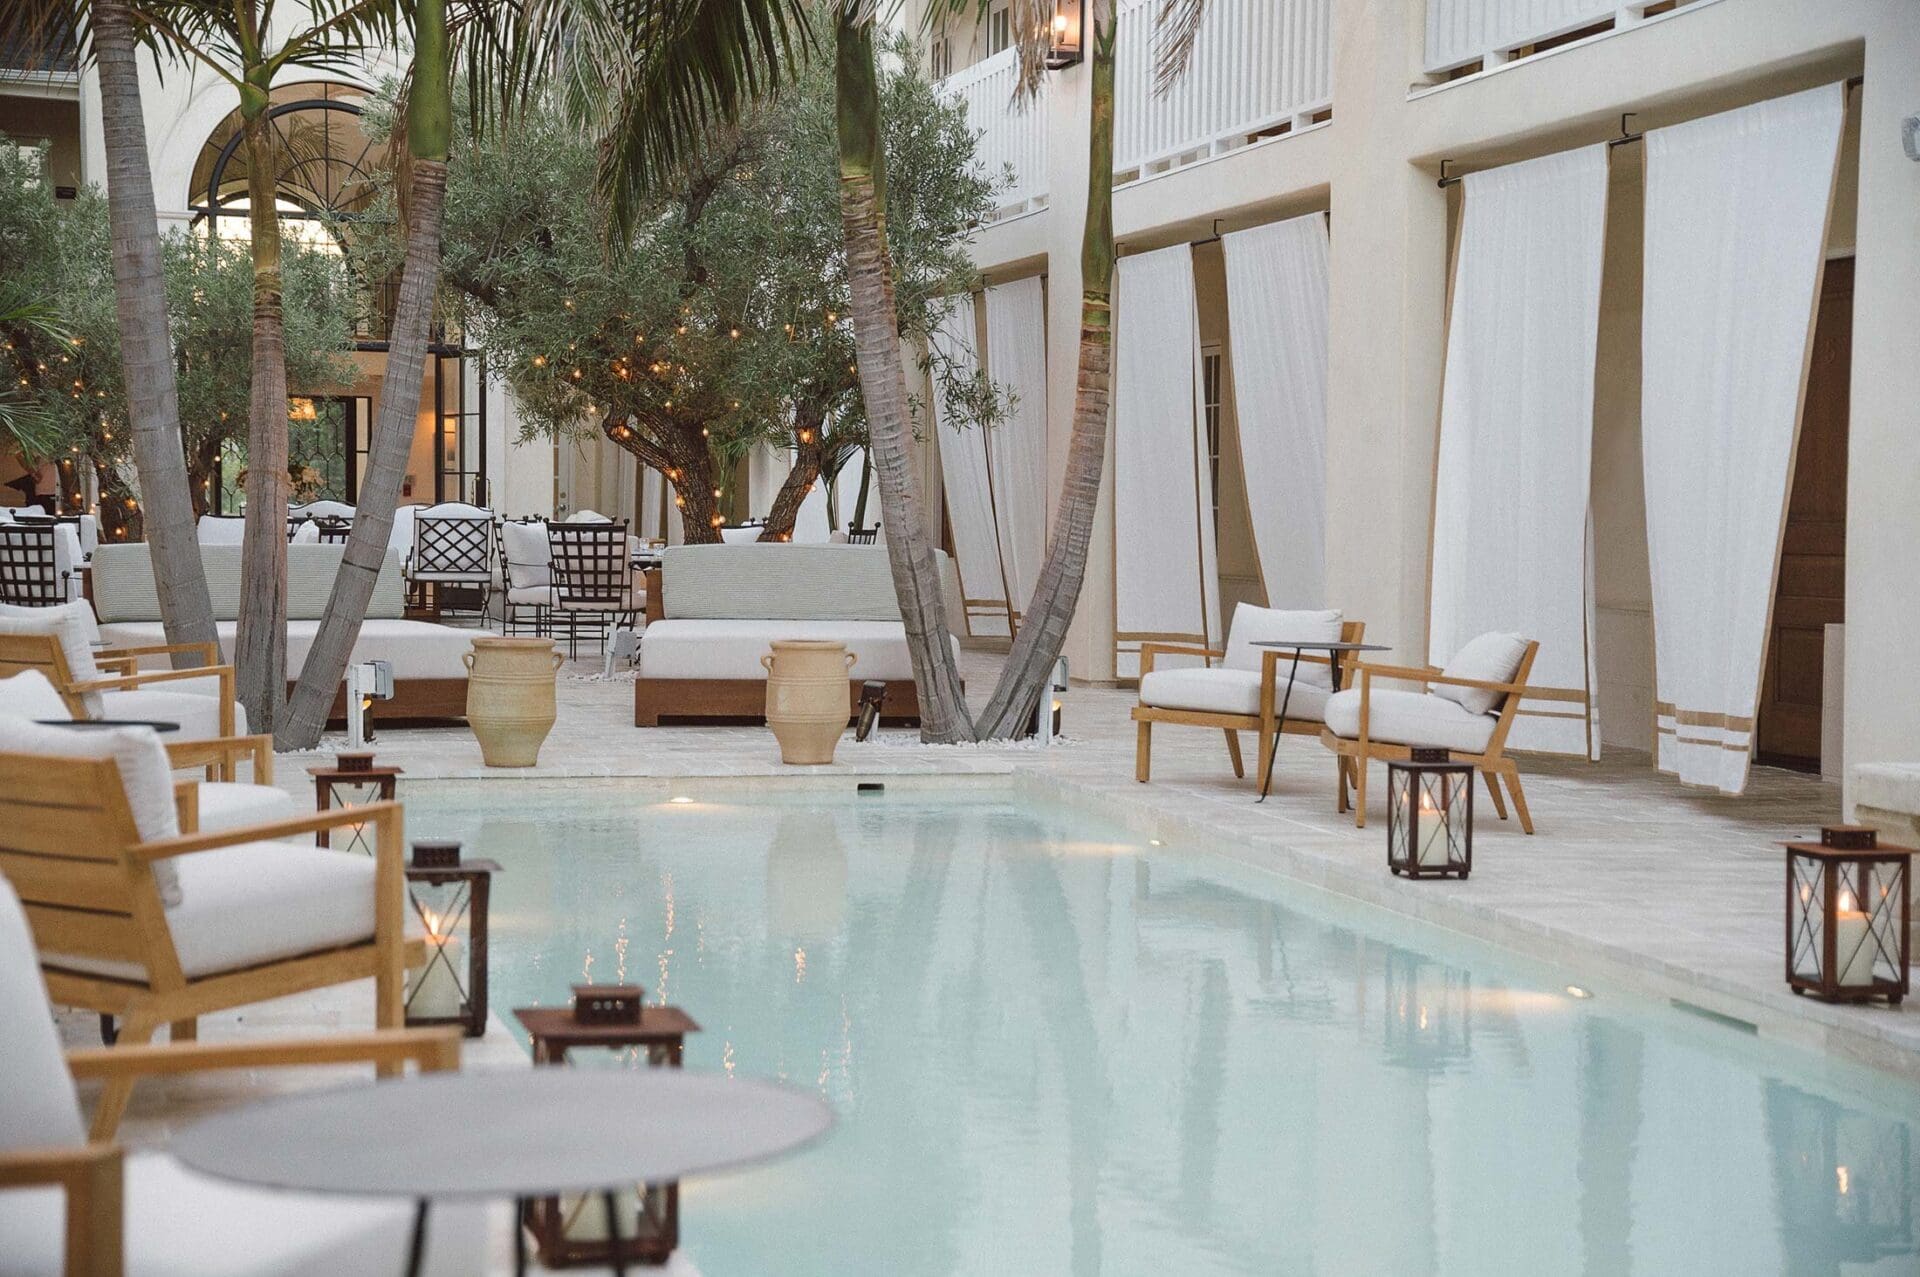 Best places to stay in LA | A scene of the central courtyard at Cara, with a pool, armchairs, lanterns, and hanging linen drapes.